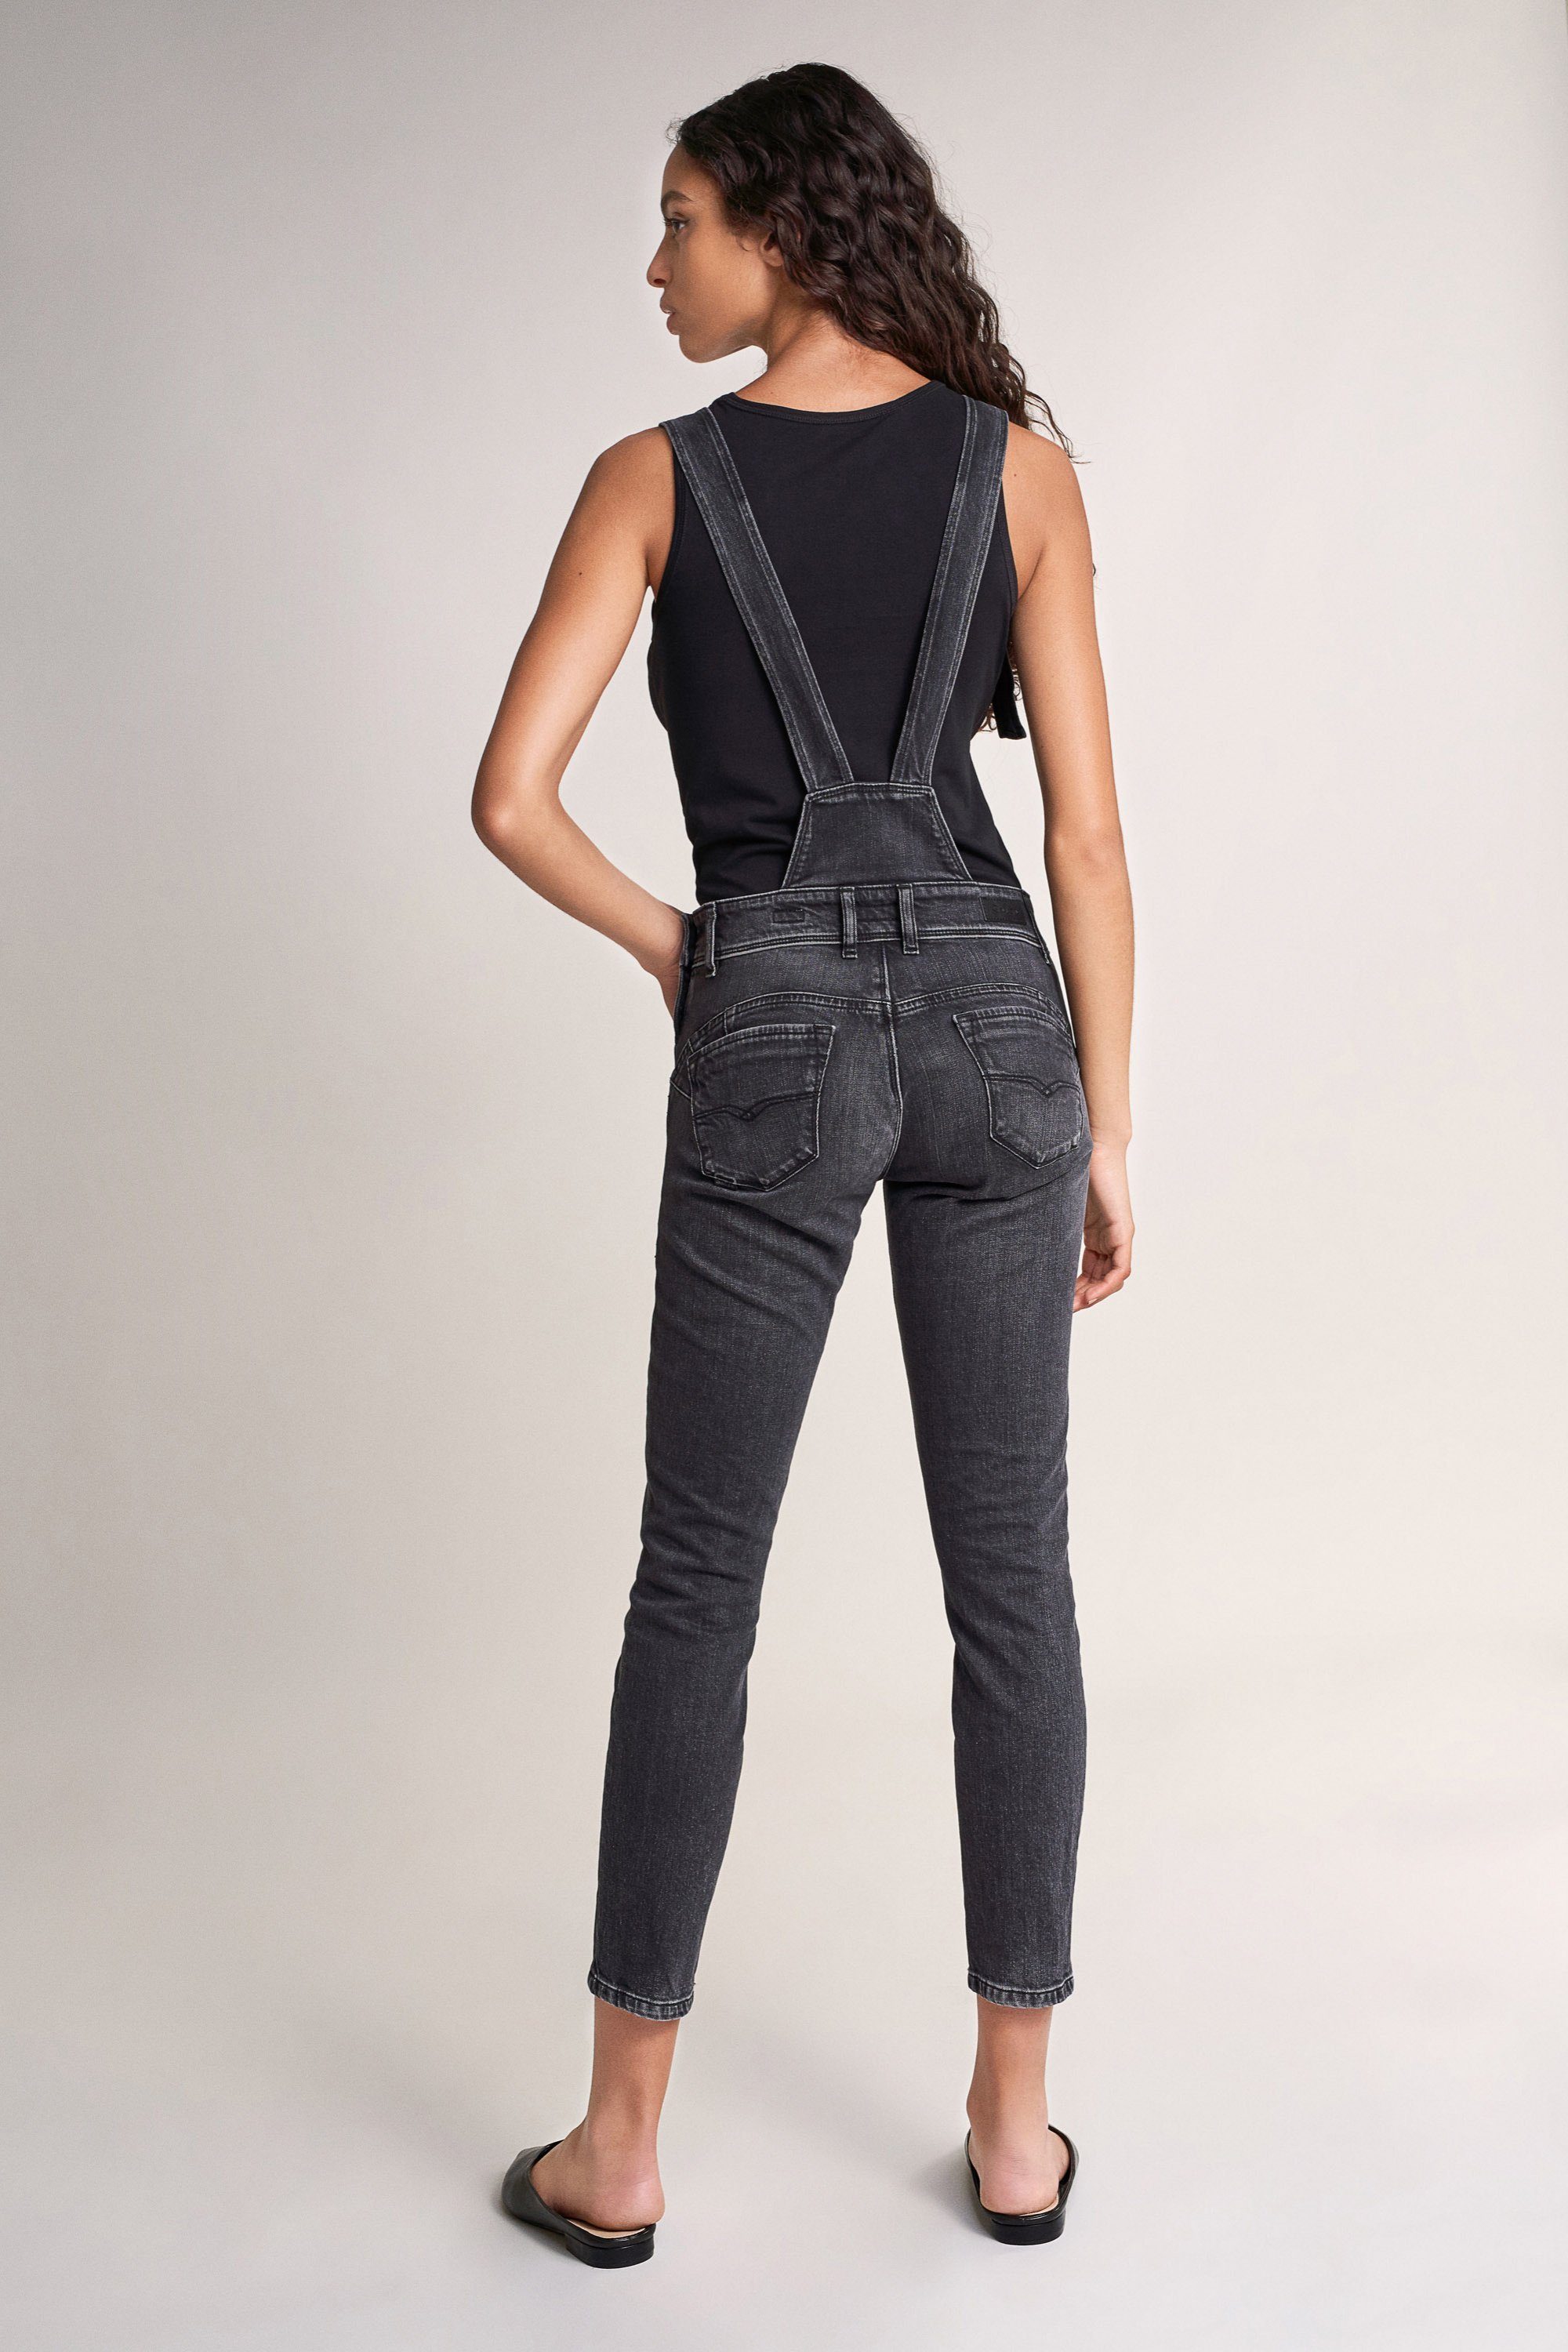 SALSA OVERALL washed JEANS 123892.0000 Salsa grey Stretch-Jeans WONDER out UP CAPRI PUSH